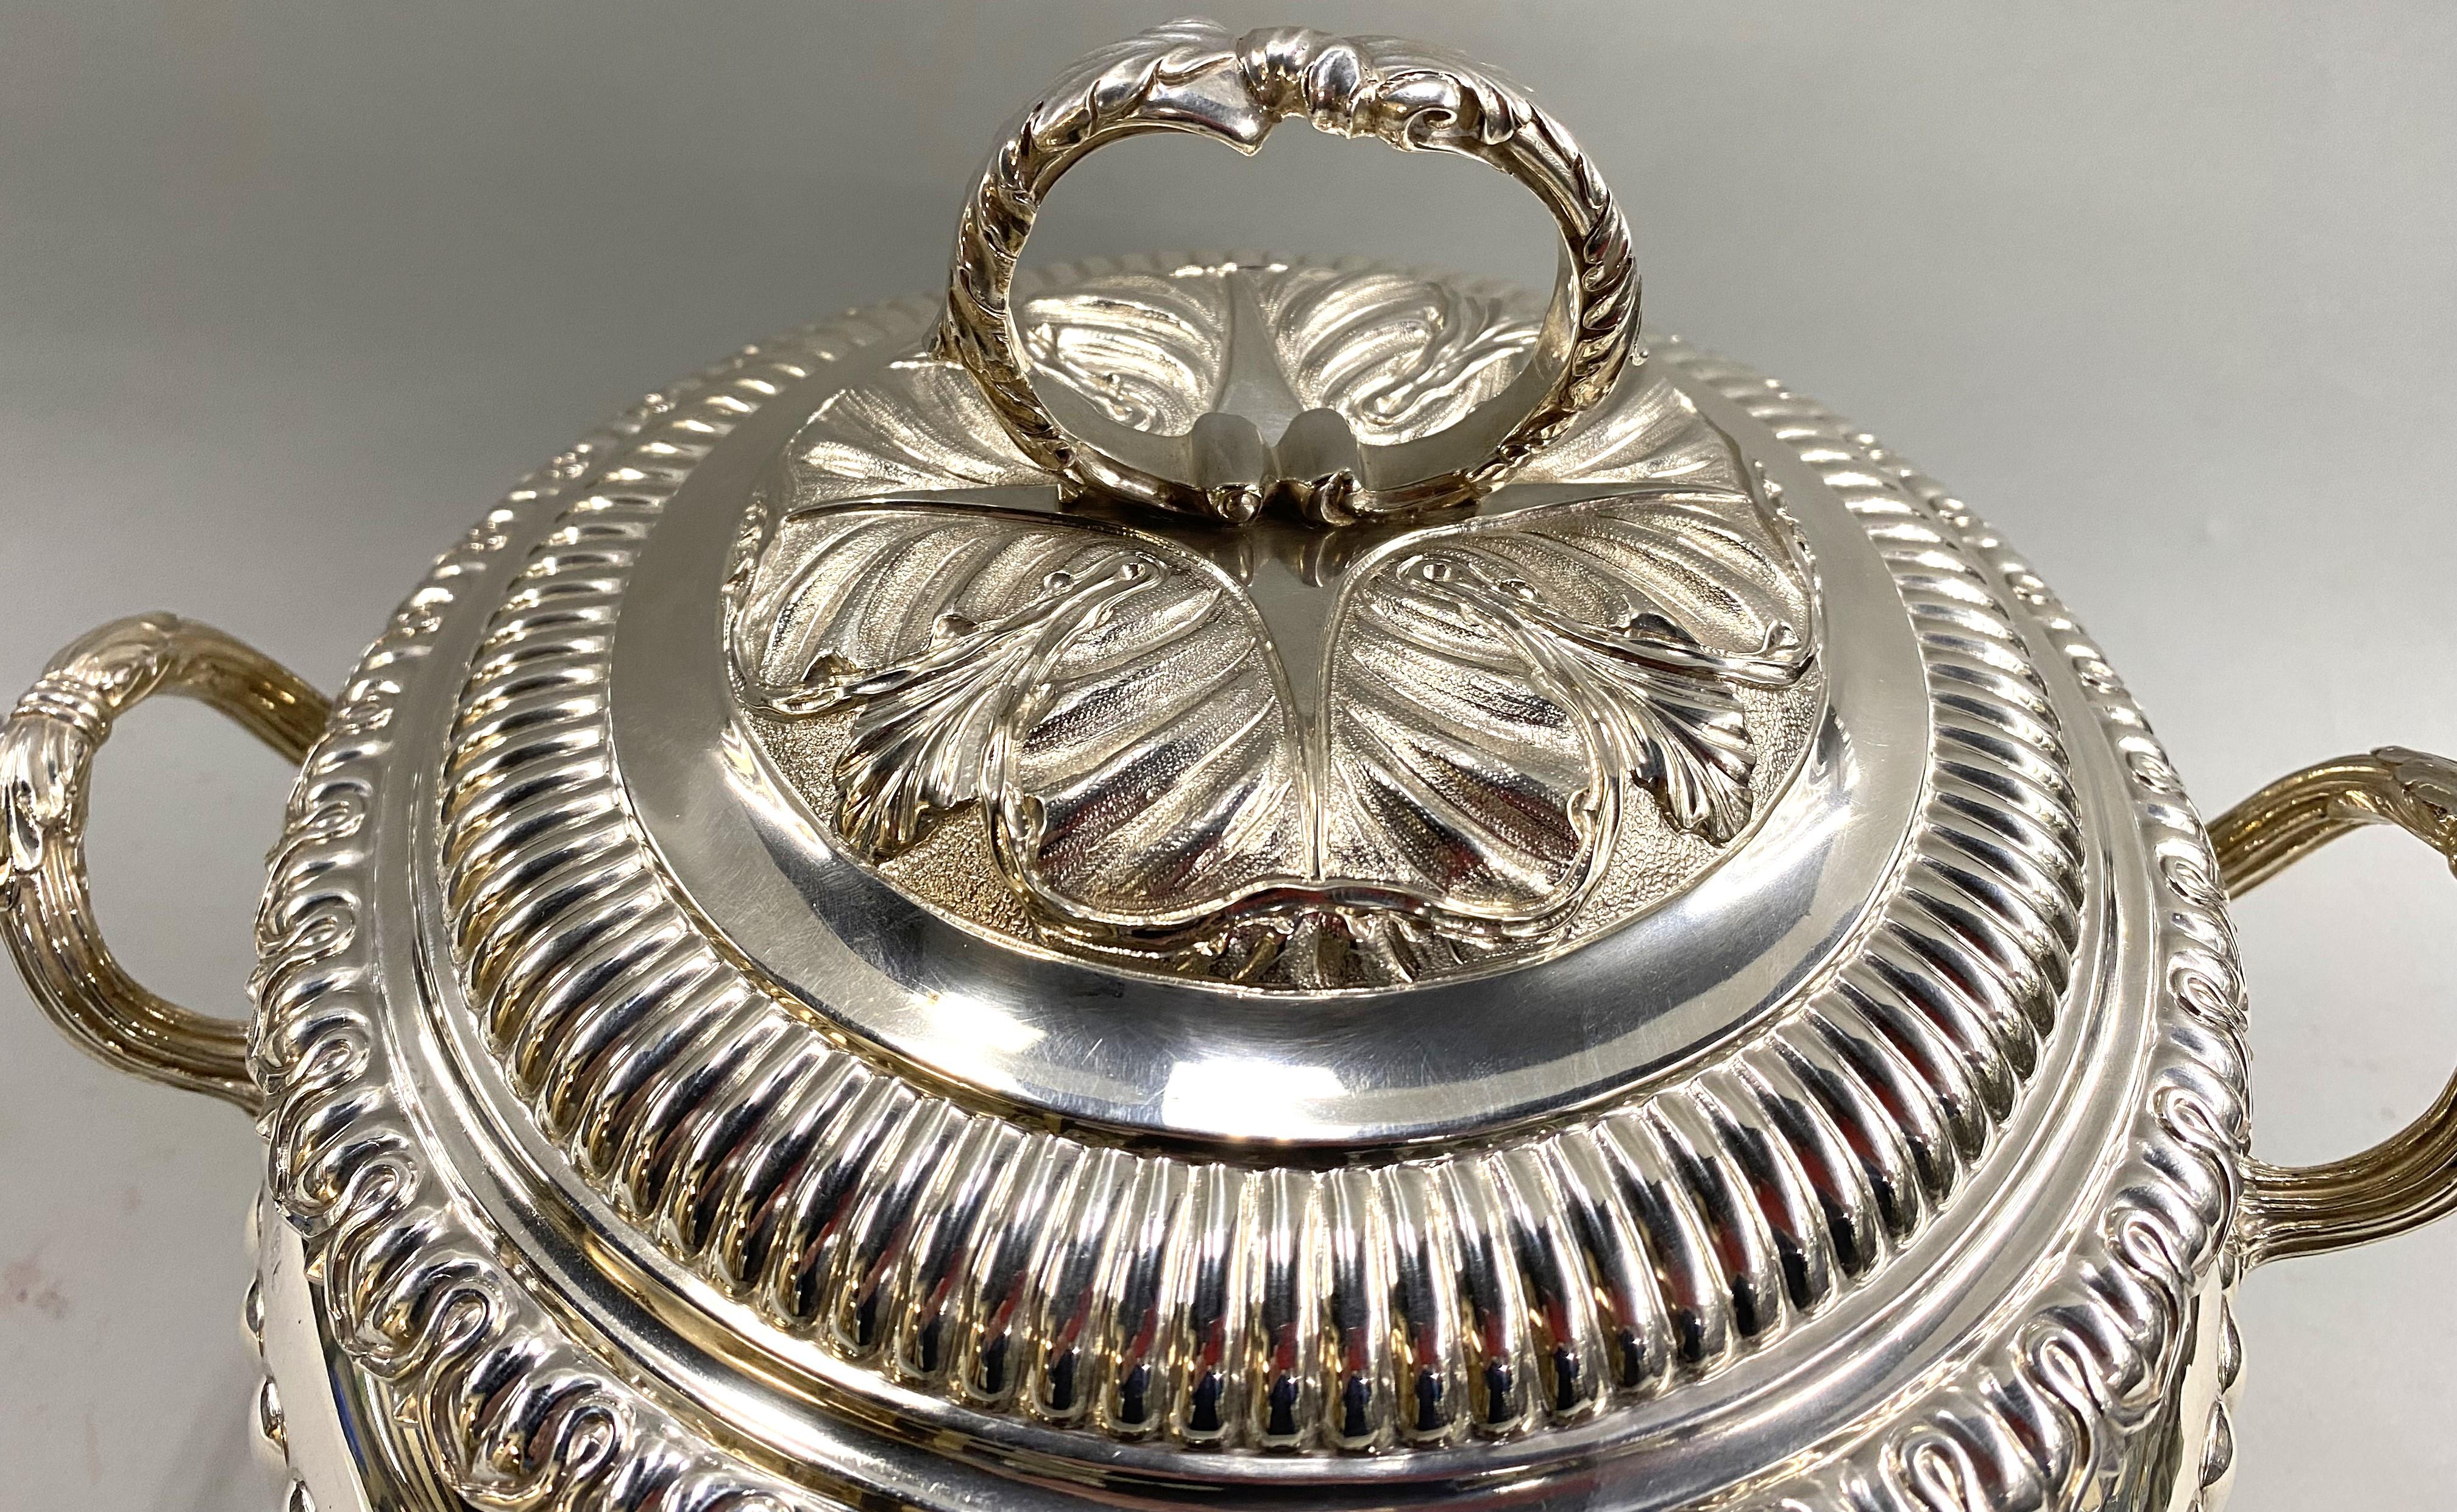 An exceptional sterling silver covered soup tureen with a compressed round body, decorated with flutes, two leaf capped handles, oak leaves, and acorns border two reserves. The base is supported on a fluted Ming foot, while the cover has a central